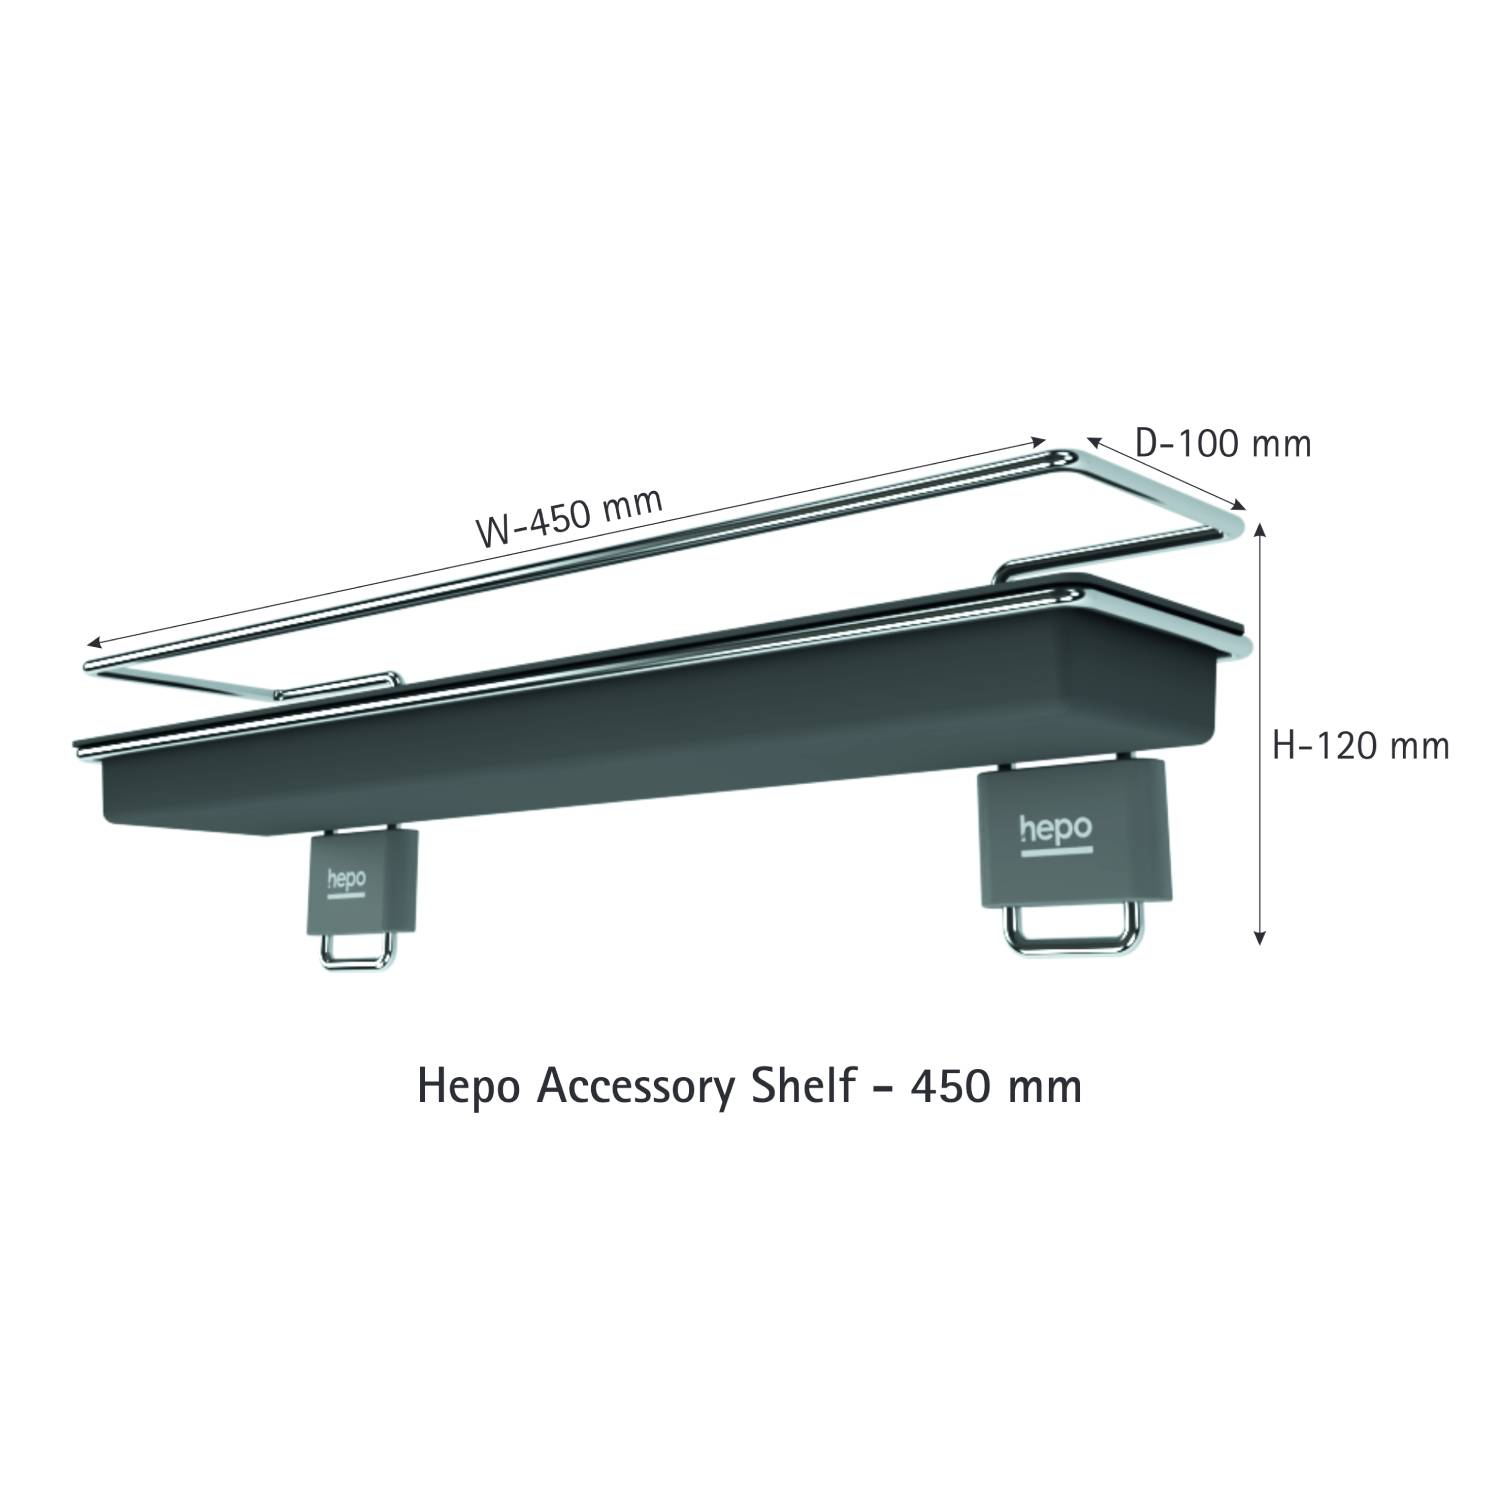 Hepo Stainless Steel 450 mm Accessory Shelf